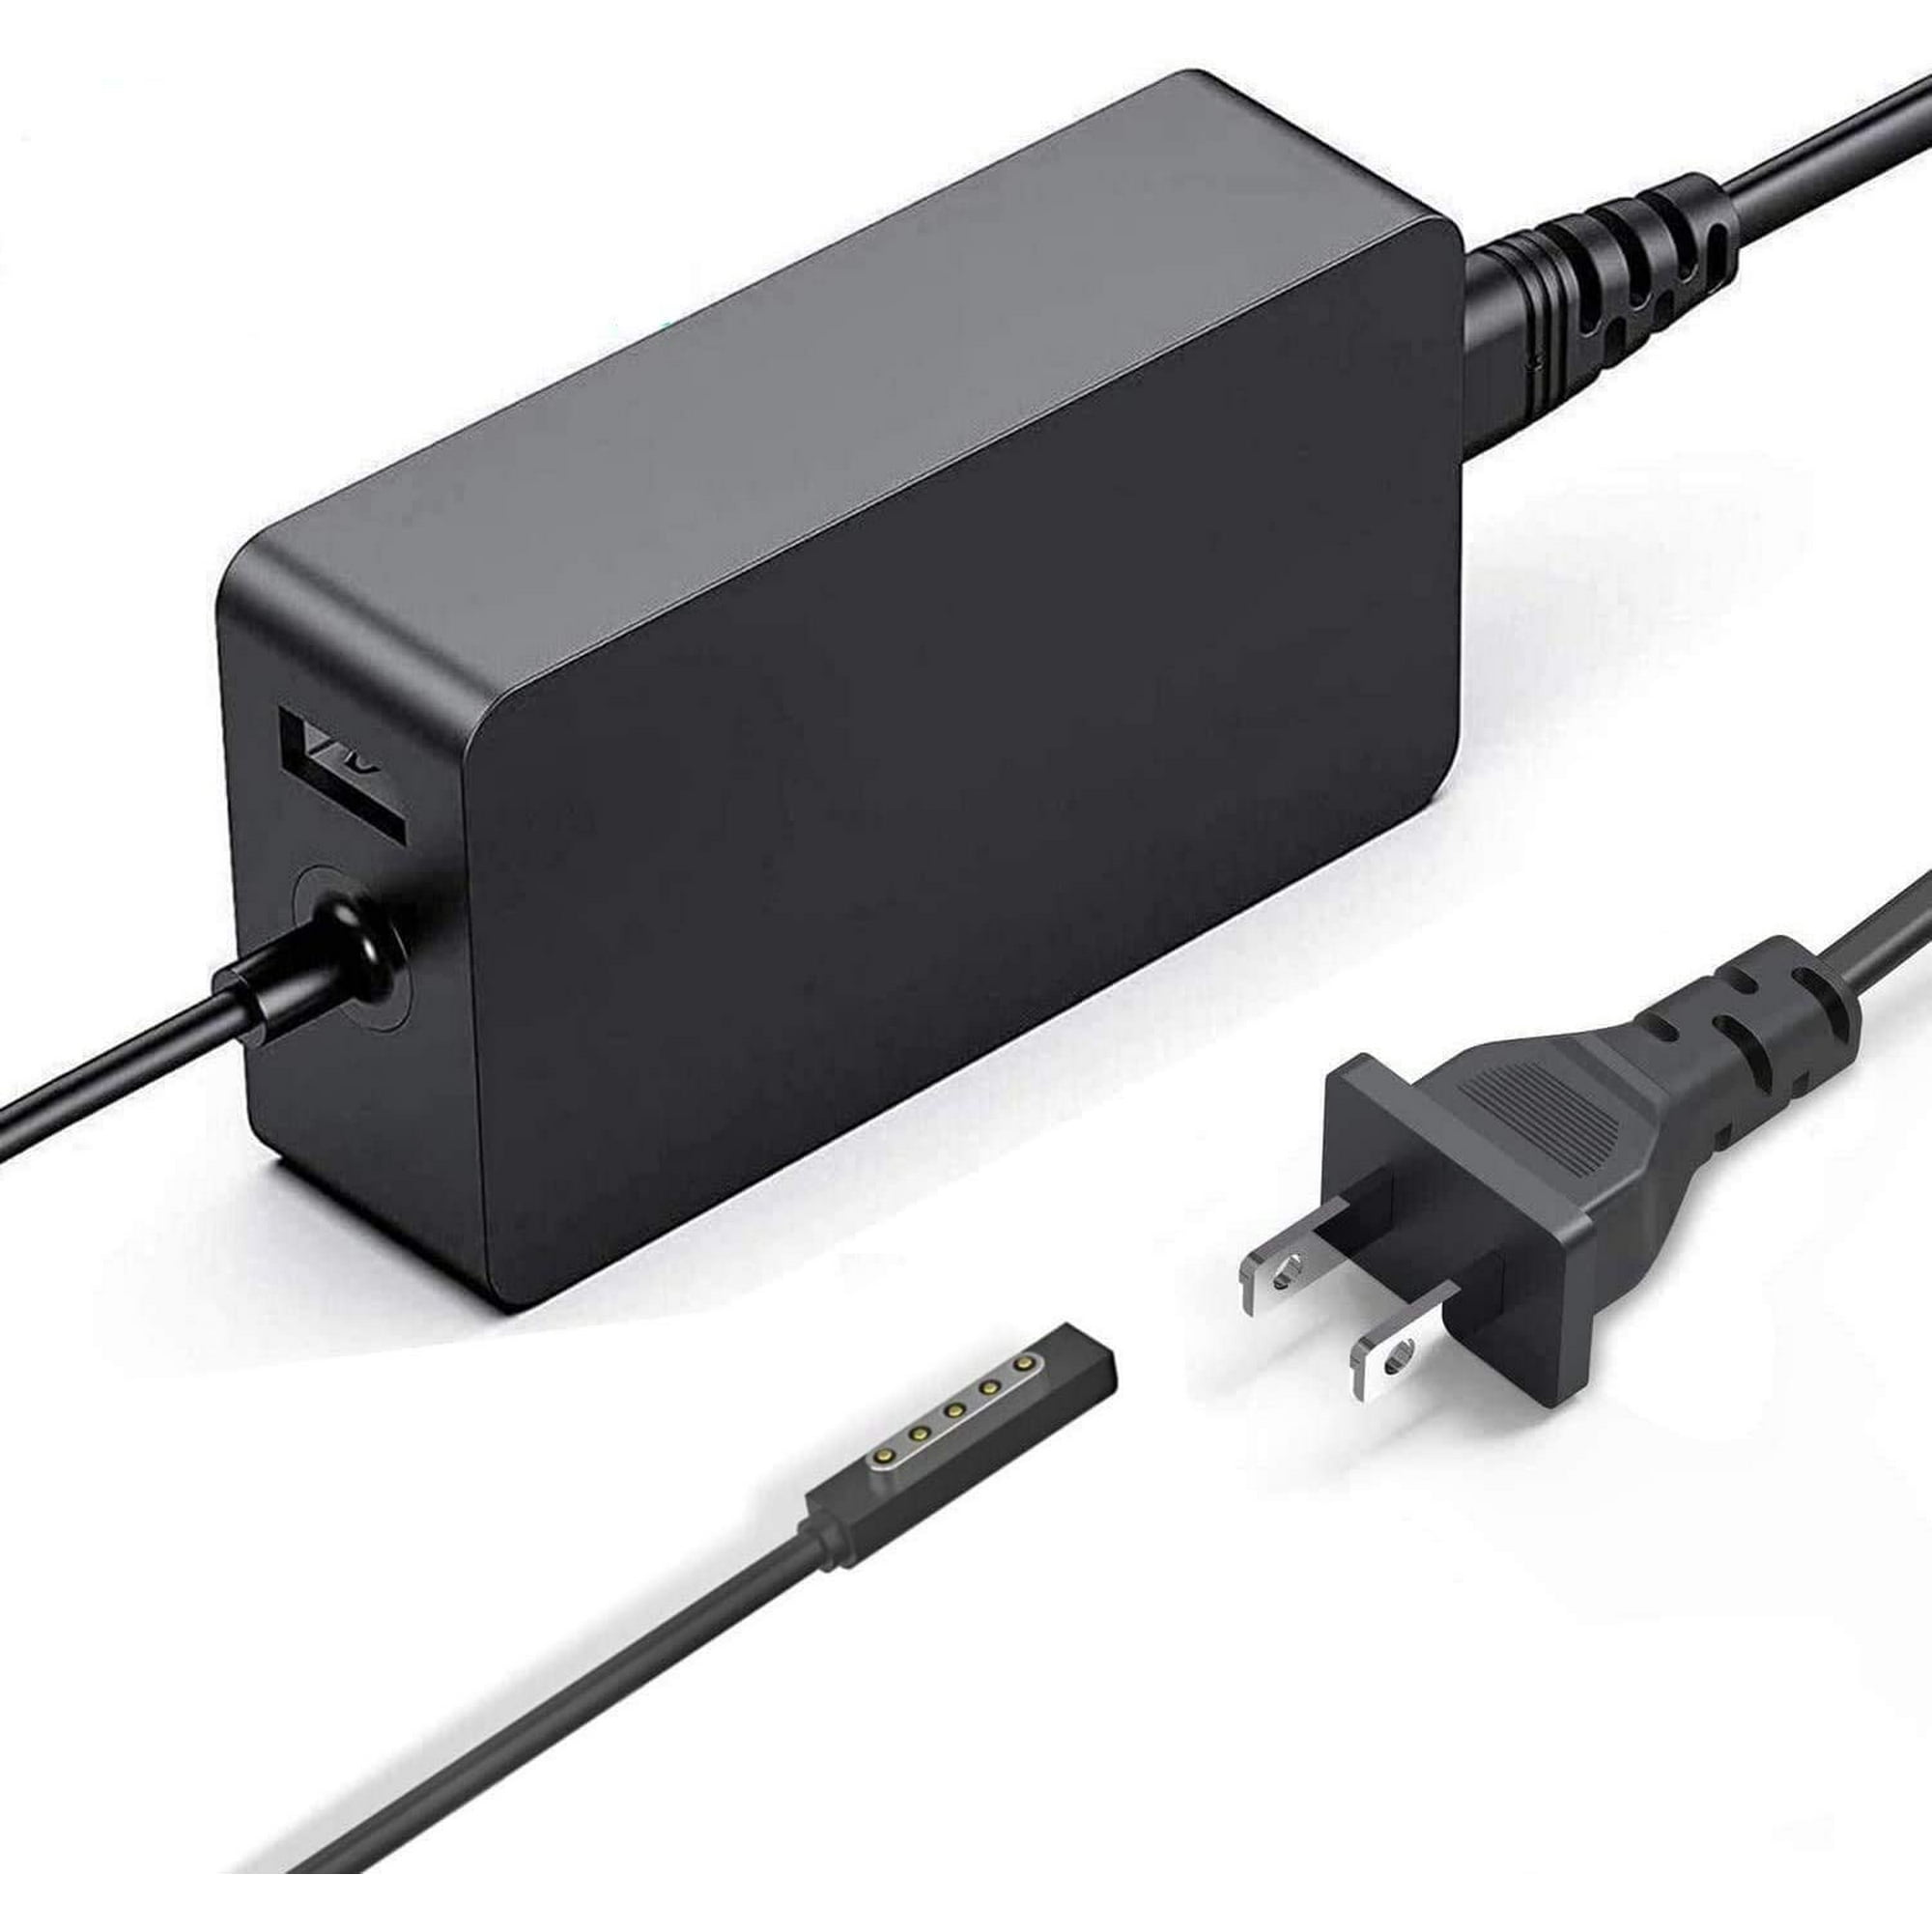 Surface Pro 1/2 Charger,48W 12V  AUKEH Power Supply Adapter for  Microsoft Surface RT/2 Surface Pro 1 Surface Pro 2 1536 Tablet PC with  5V/1A USB Port and Power Cord | Walmart Canada